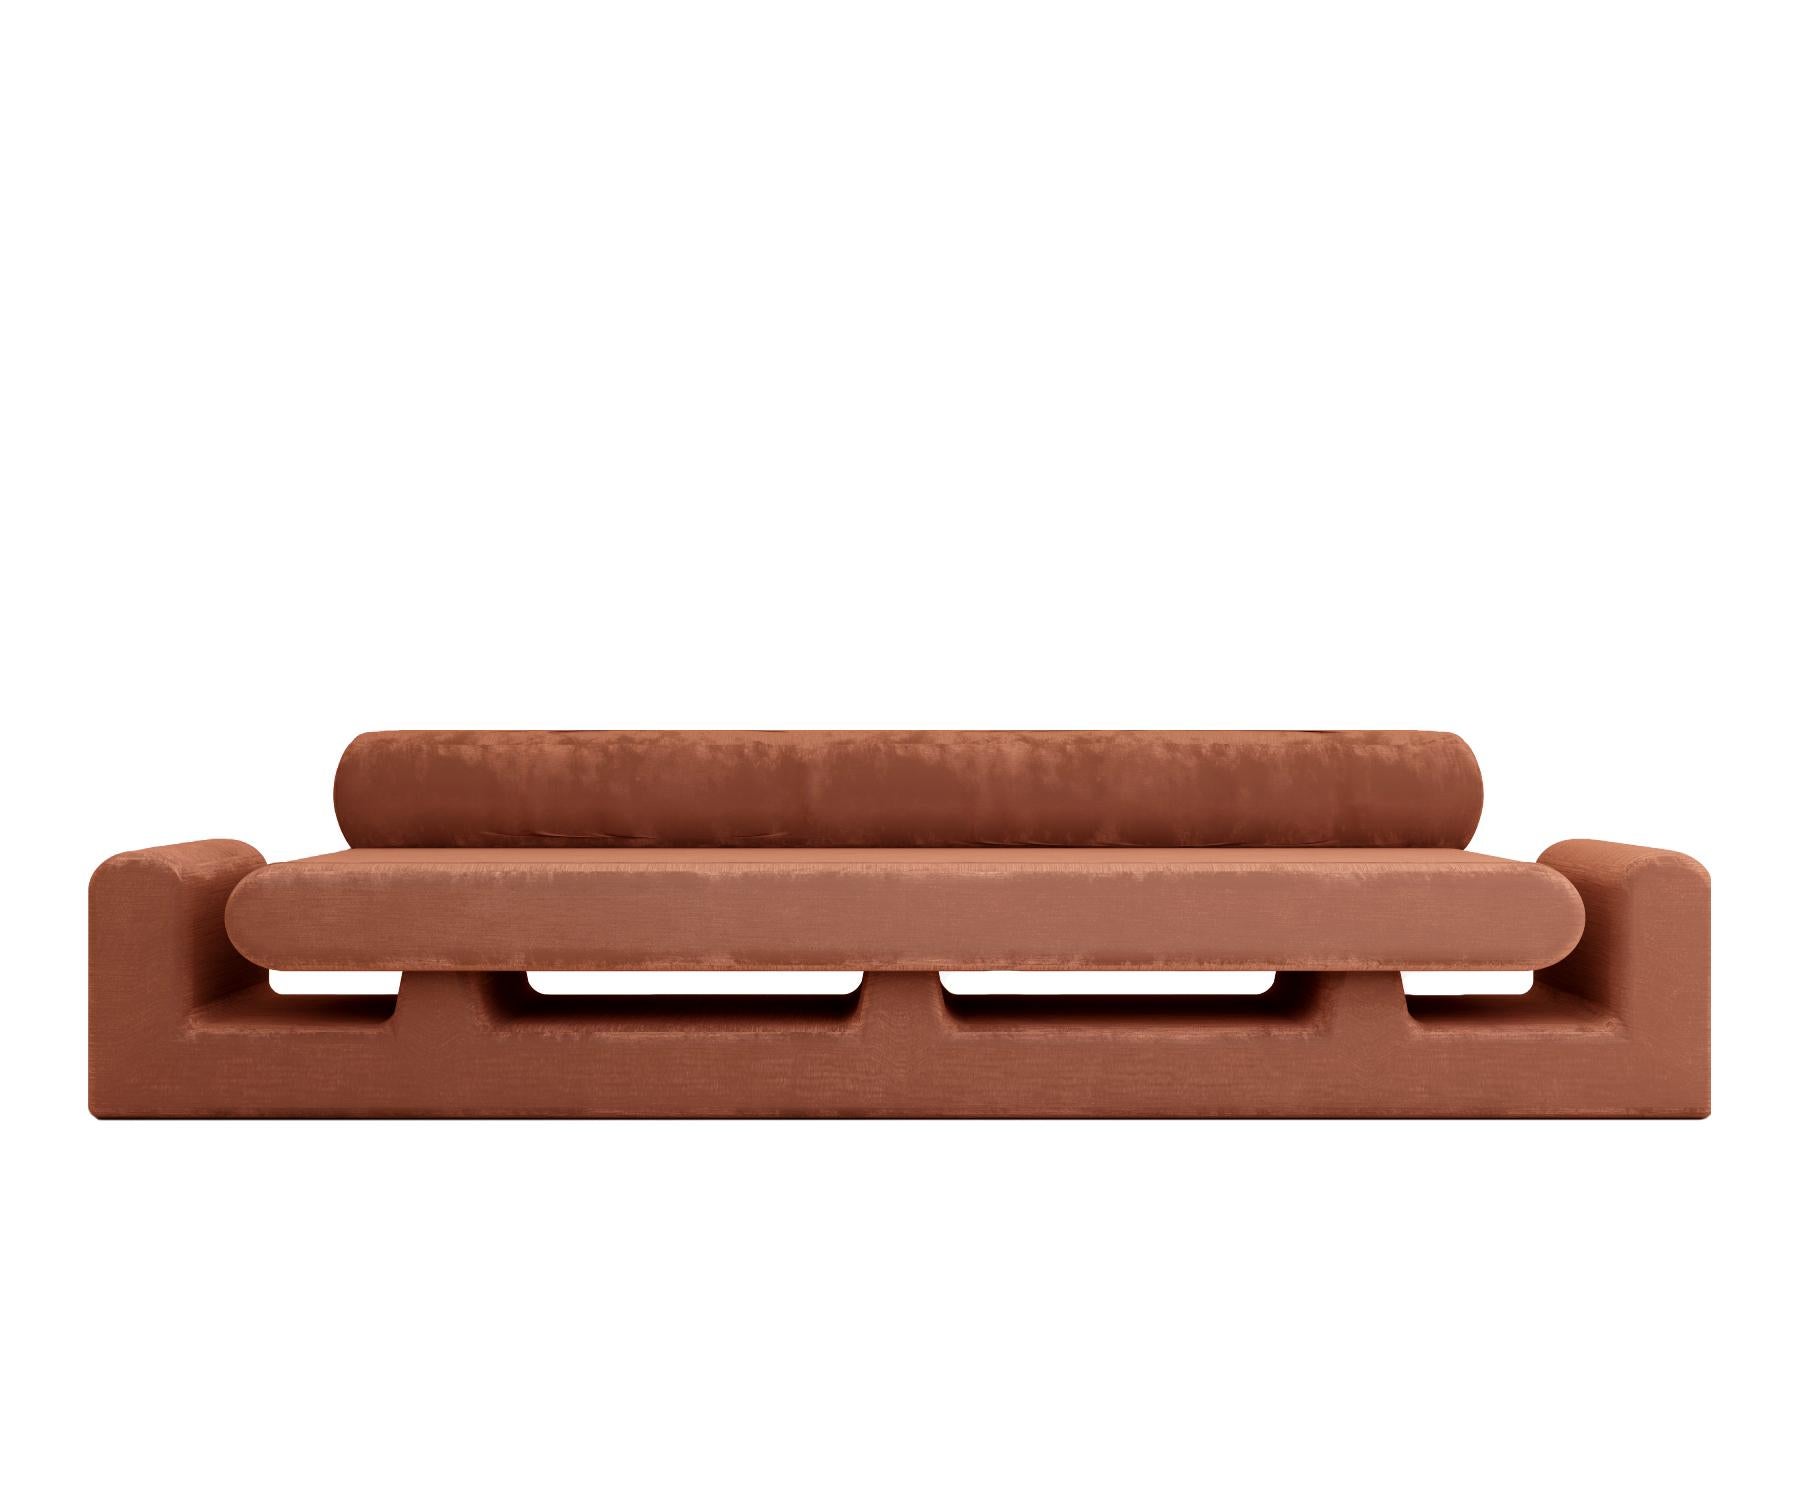 Hug Brown Sofa by Rejo Studio
Dimensions: D 315 x W 95 x H 76 cm
Materials: Wooden structure, with Velvet
Also Available in different colours.

Long comfortable hug. The hug sofa features two welcoming chubby arms and a magical handy space for